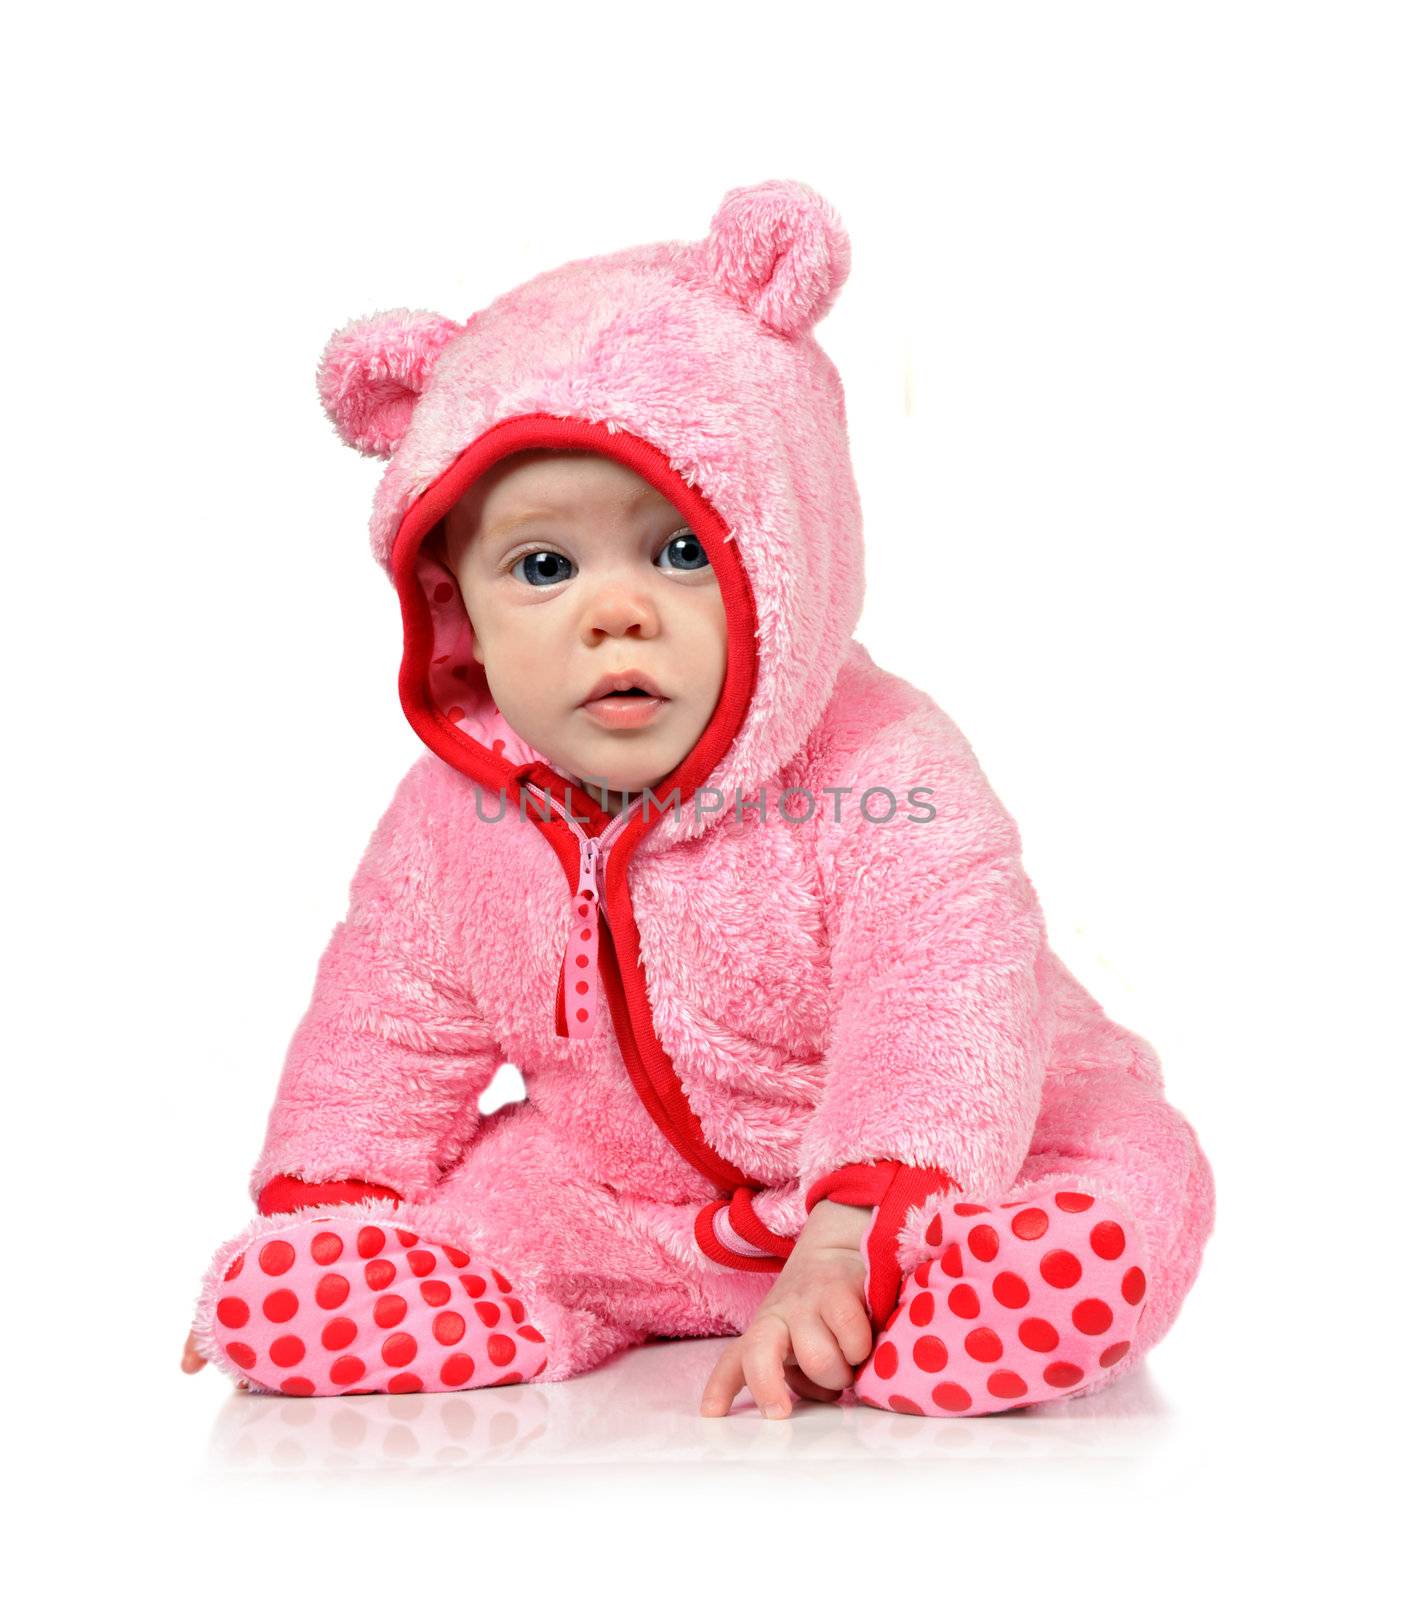 Cute little baby girl in fun clothes on a white background